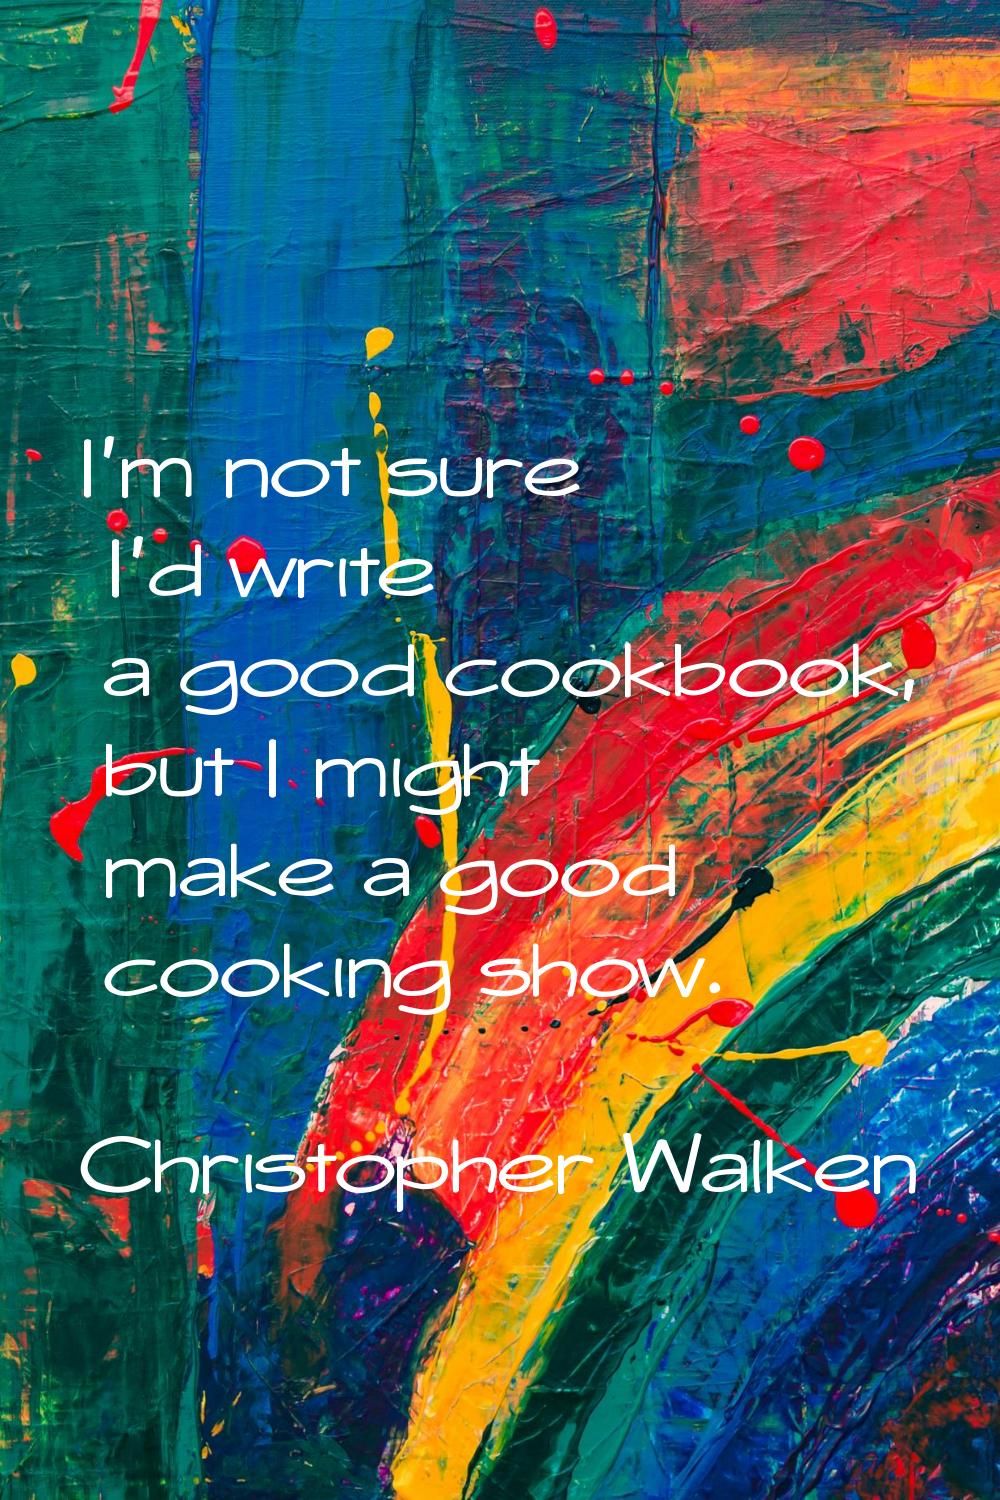 I'm not sure I'd write a good cookbook, but I might make a good cooking show.